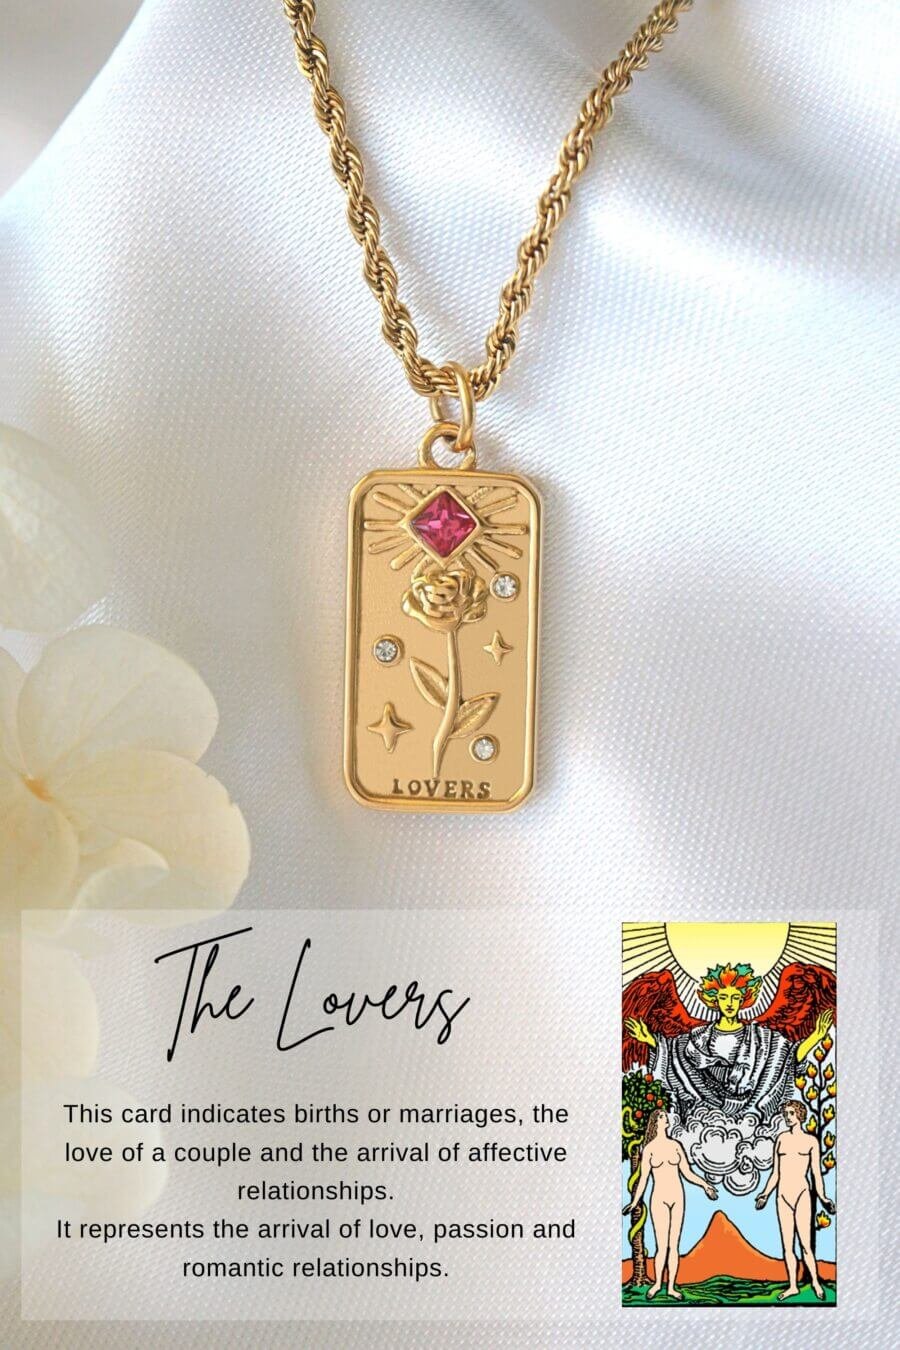 Bronze Sun Tarot Card Necklace with Gold Fill Chain